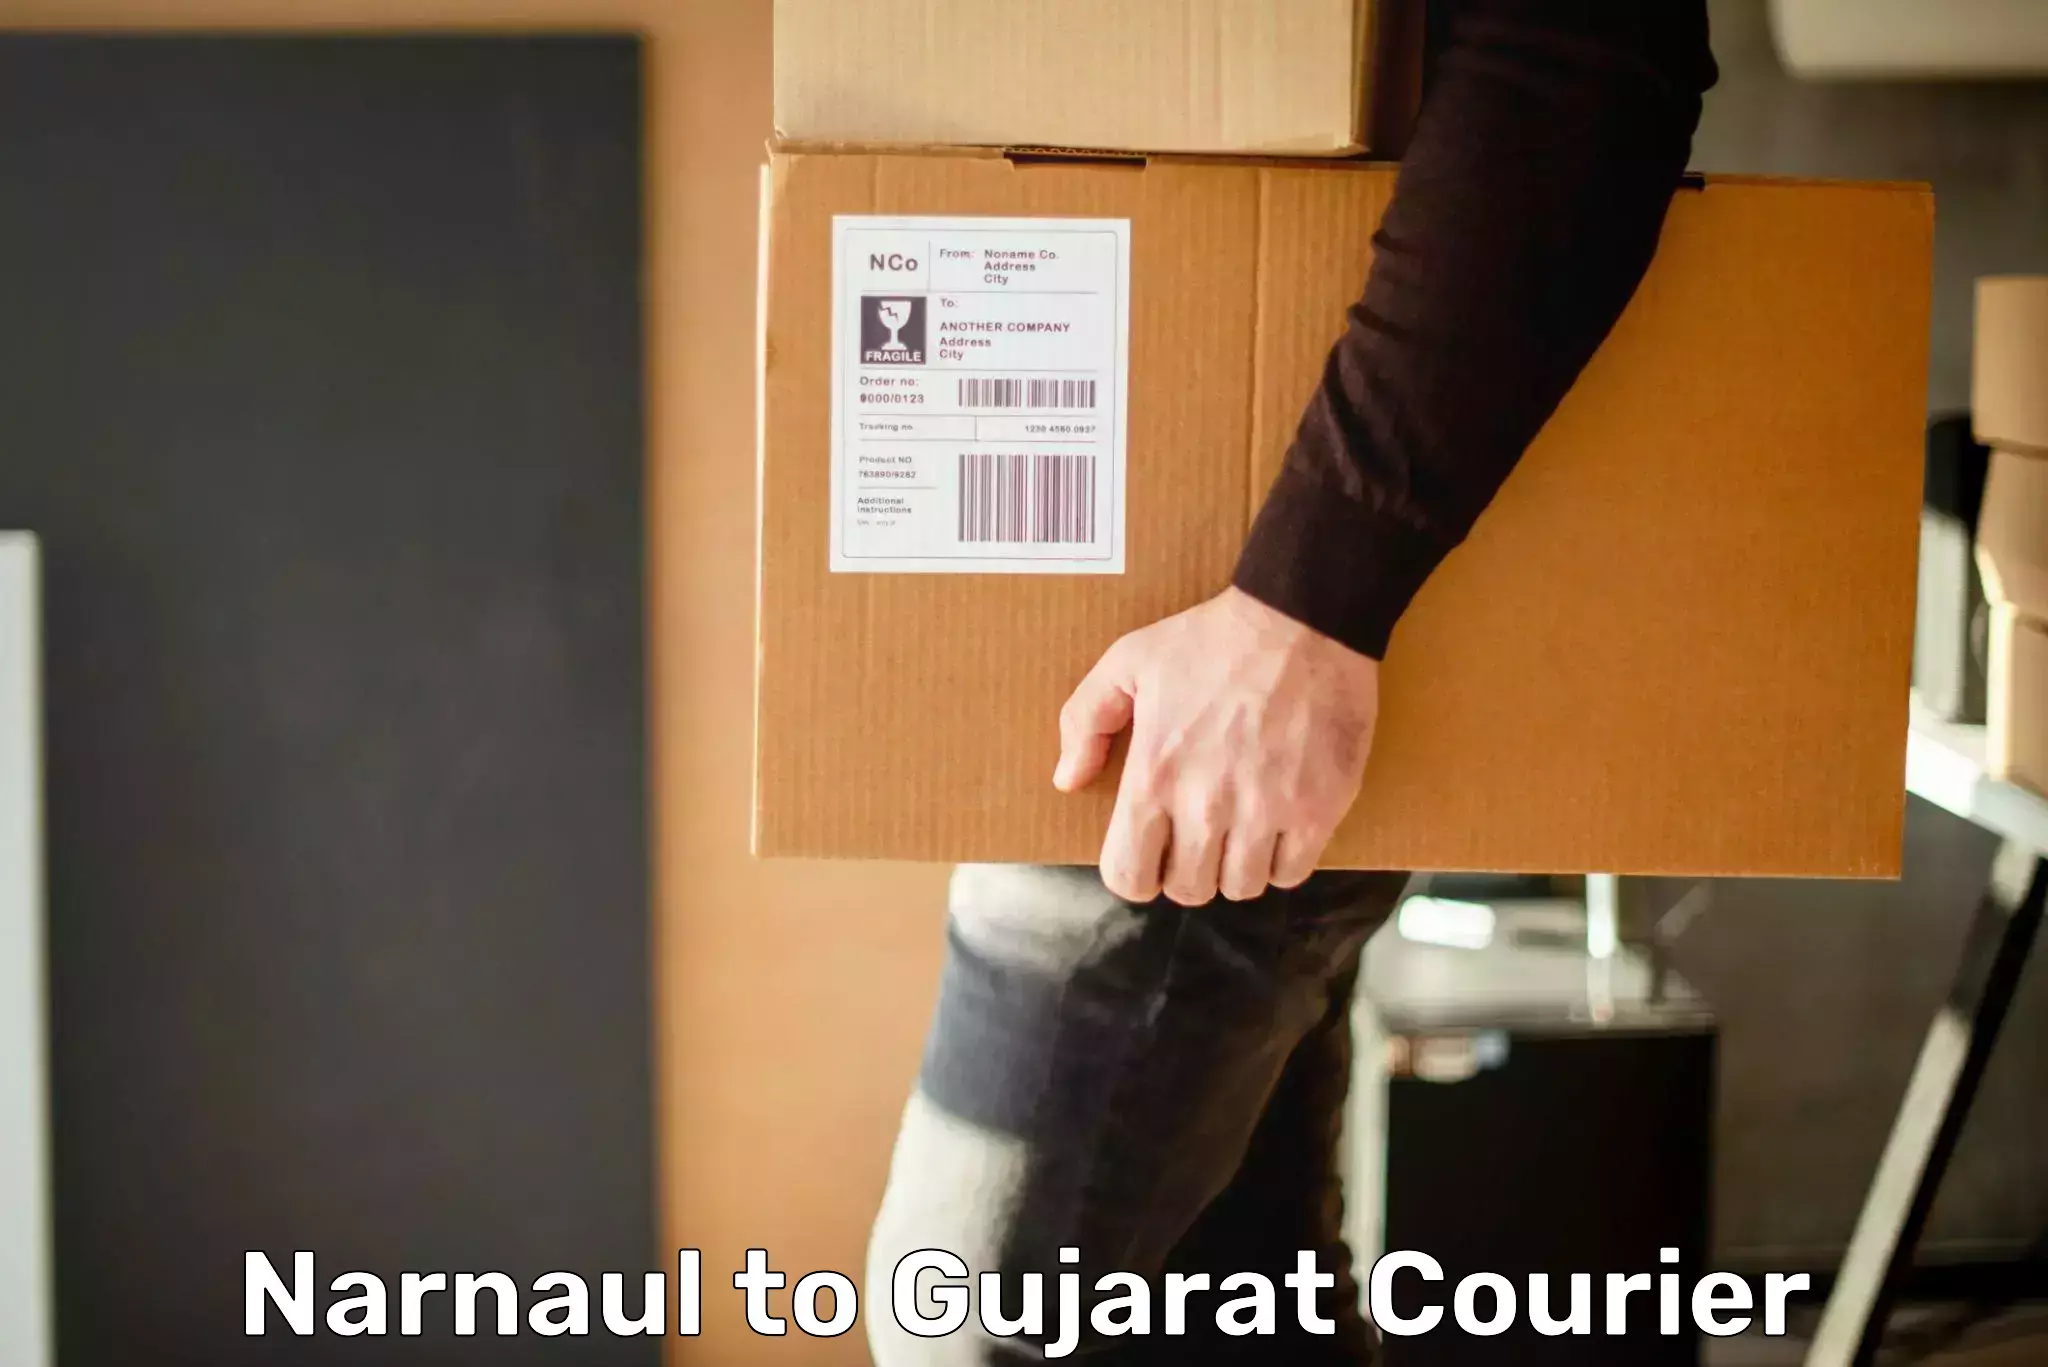 User-friendly delivery service Narnaul to Gujarat